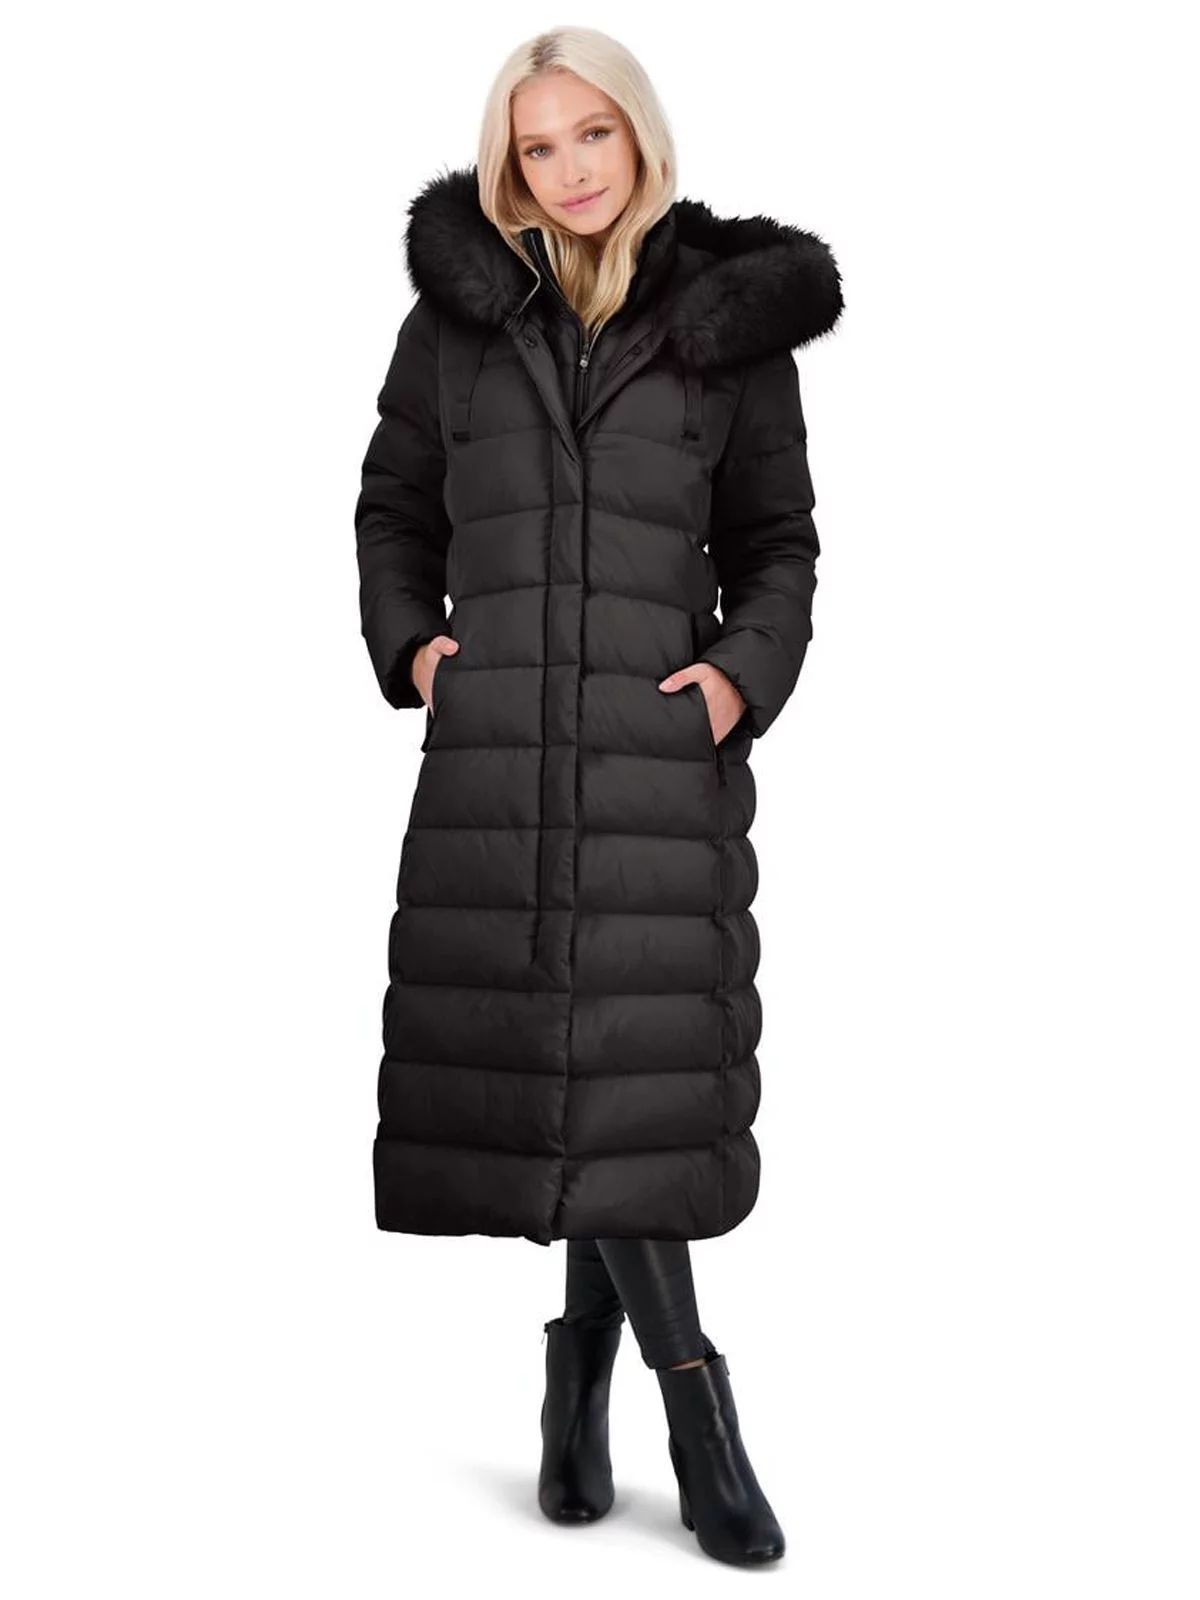 Tahari Nellie Long Coat for Women-Insulated Jacket with Removable Faux Fur Trim | Walmart (US)